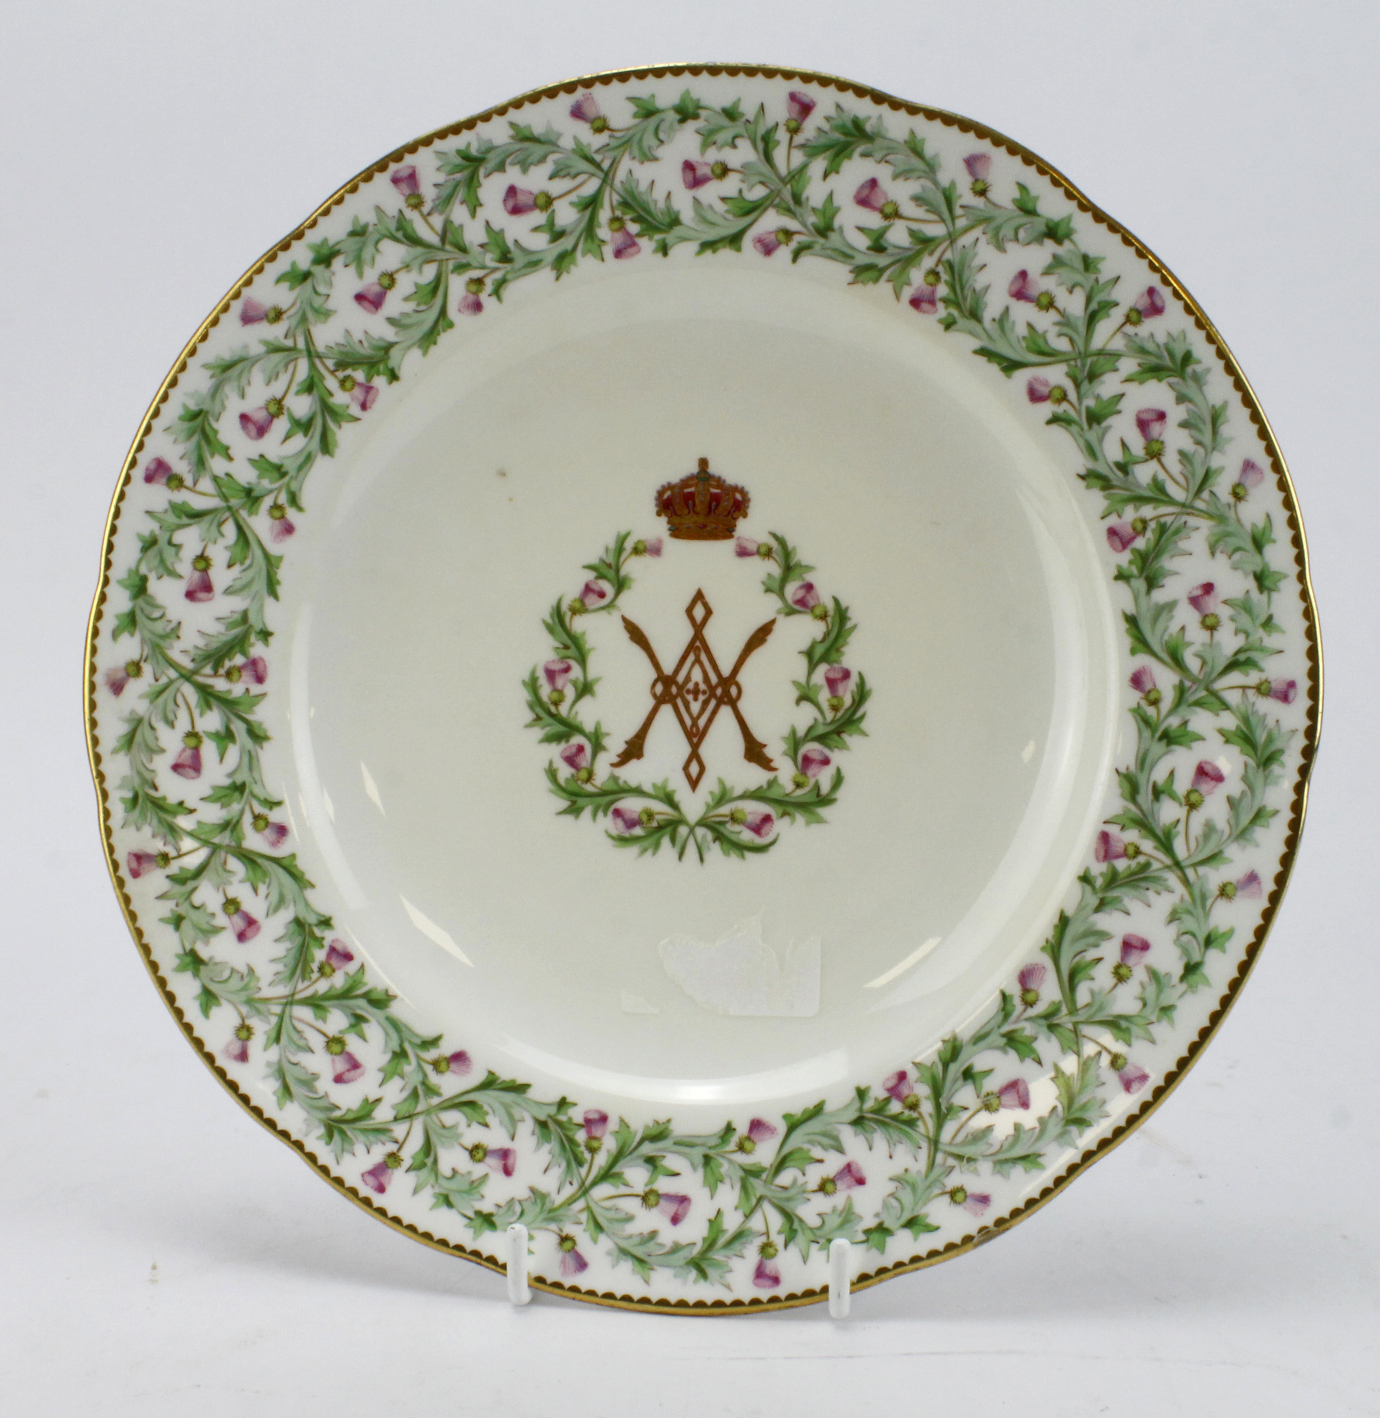 Mintons Porcelain Plate from the Balmoral Castle Service. Centre monogram for Victoria and Albert in